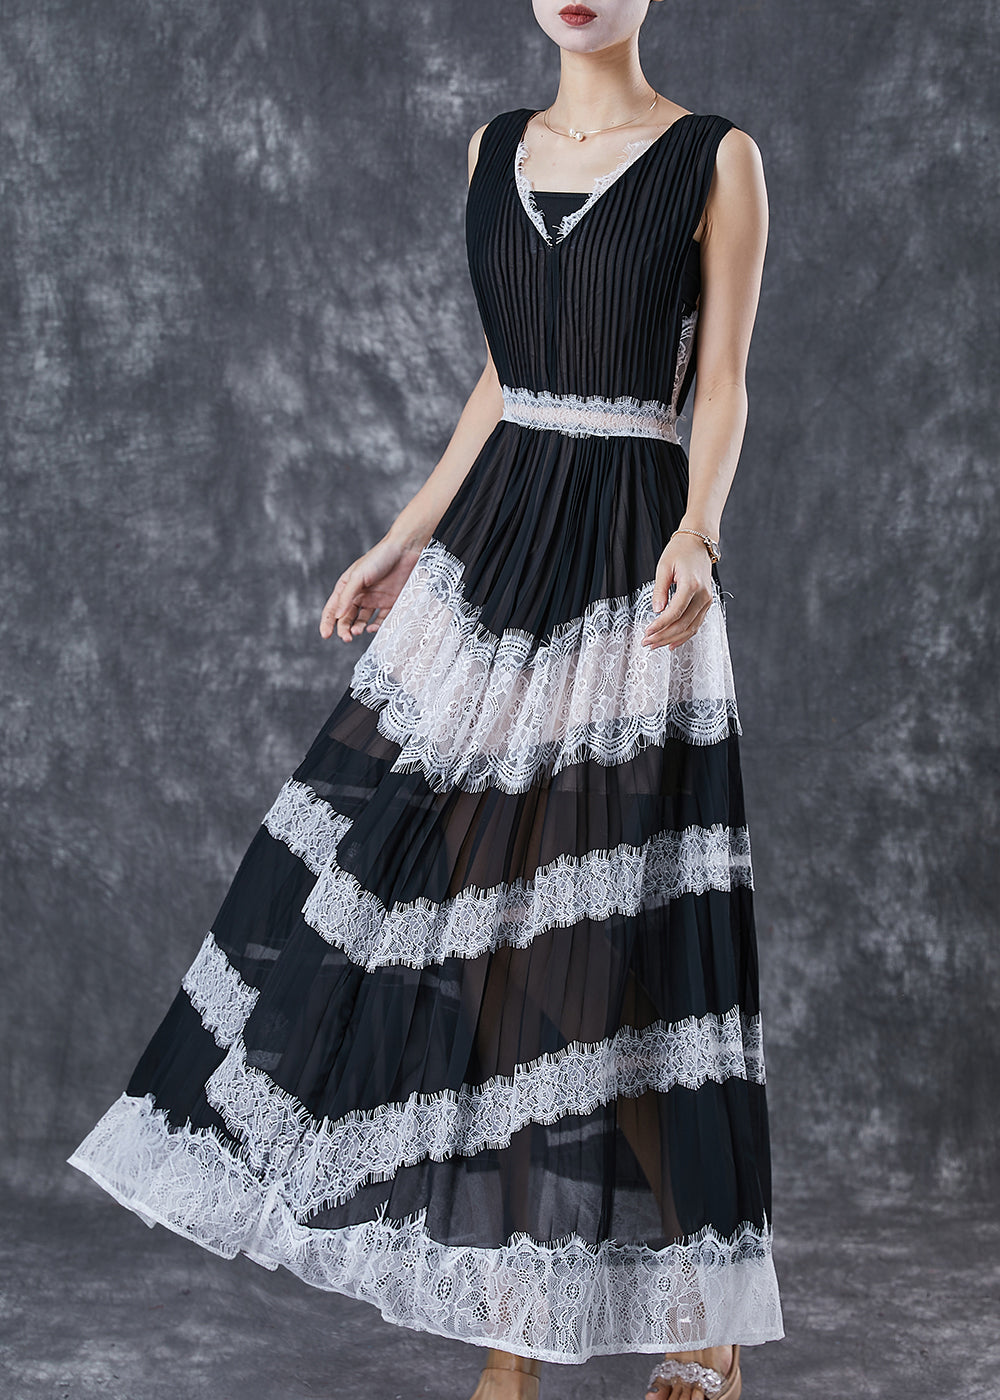 Casual Black Exra Large Hem Patchwork Lace Linen Silk Pleated Dresses Sleeveless